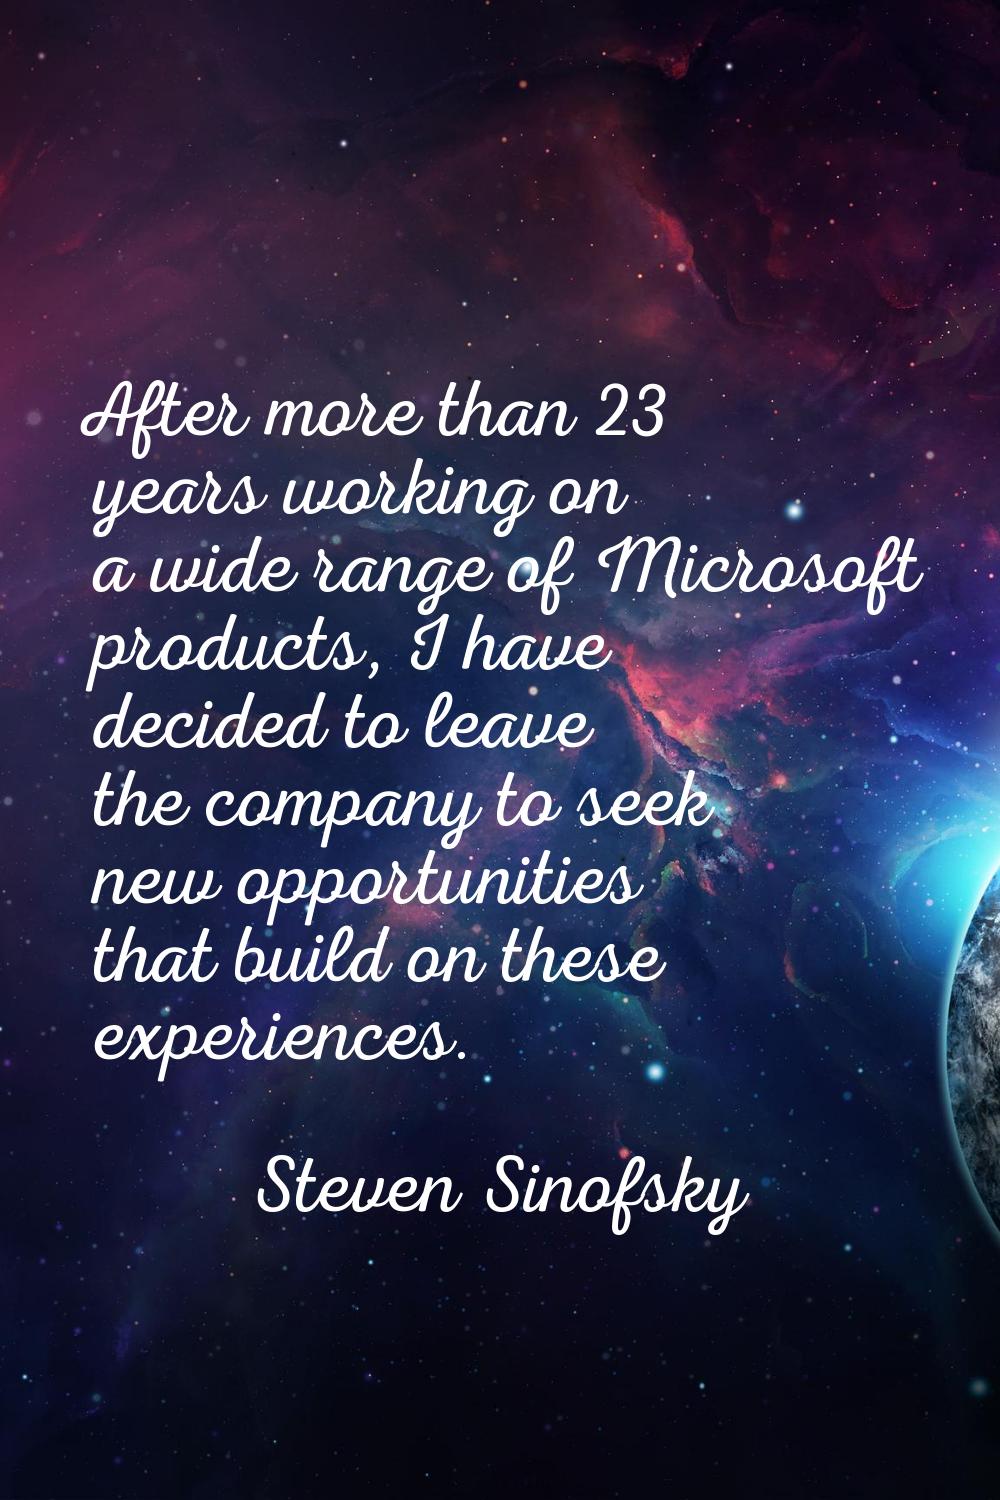 After more than 23 years working on a wide range of Microsoft products, I have decided to leave the